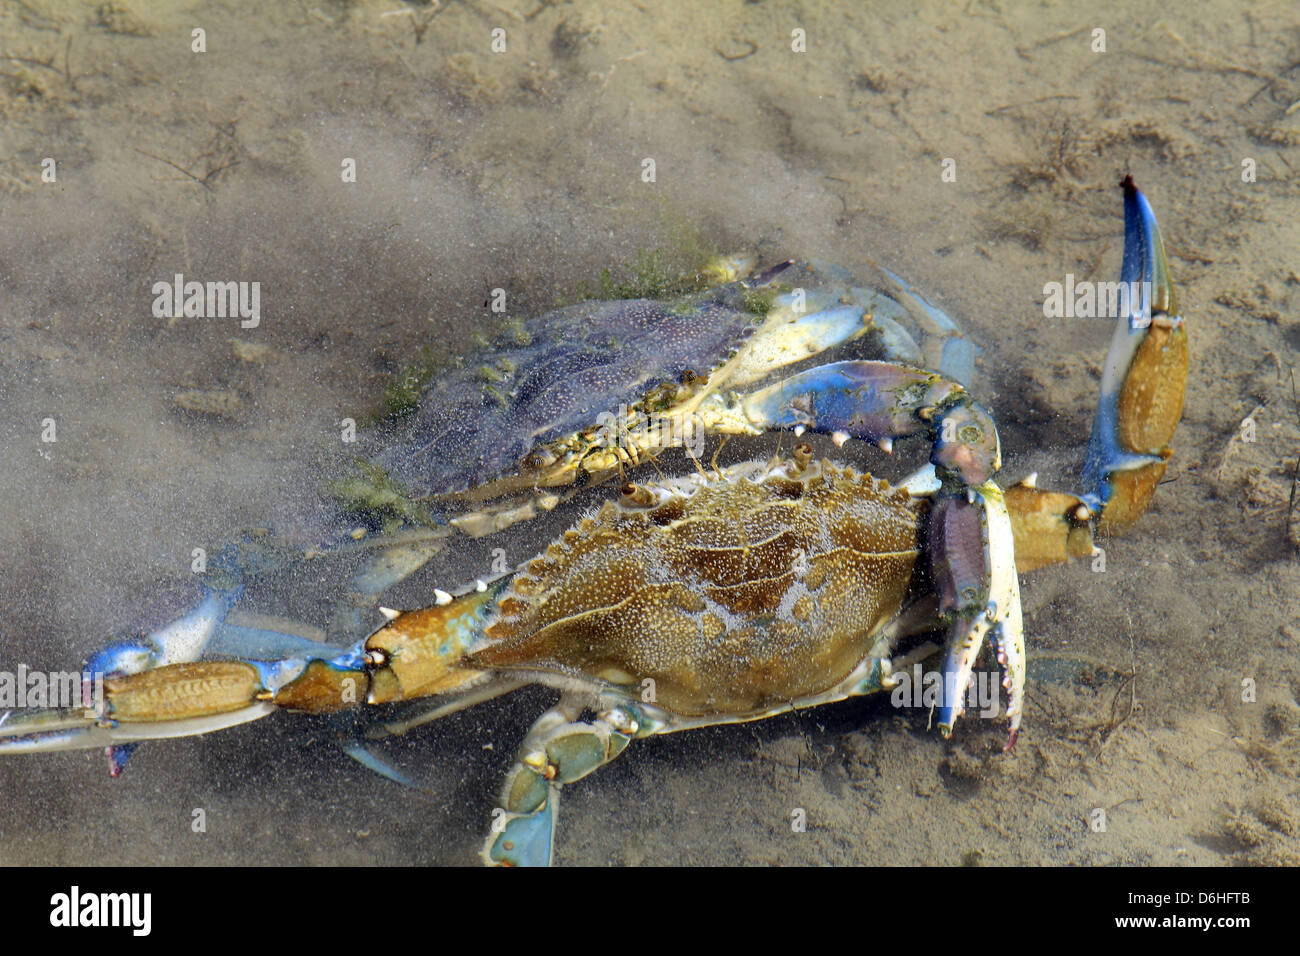 Blue crab, fighting, Blue crabs fighting Stock Photo